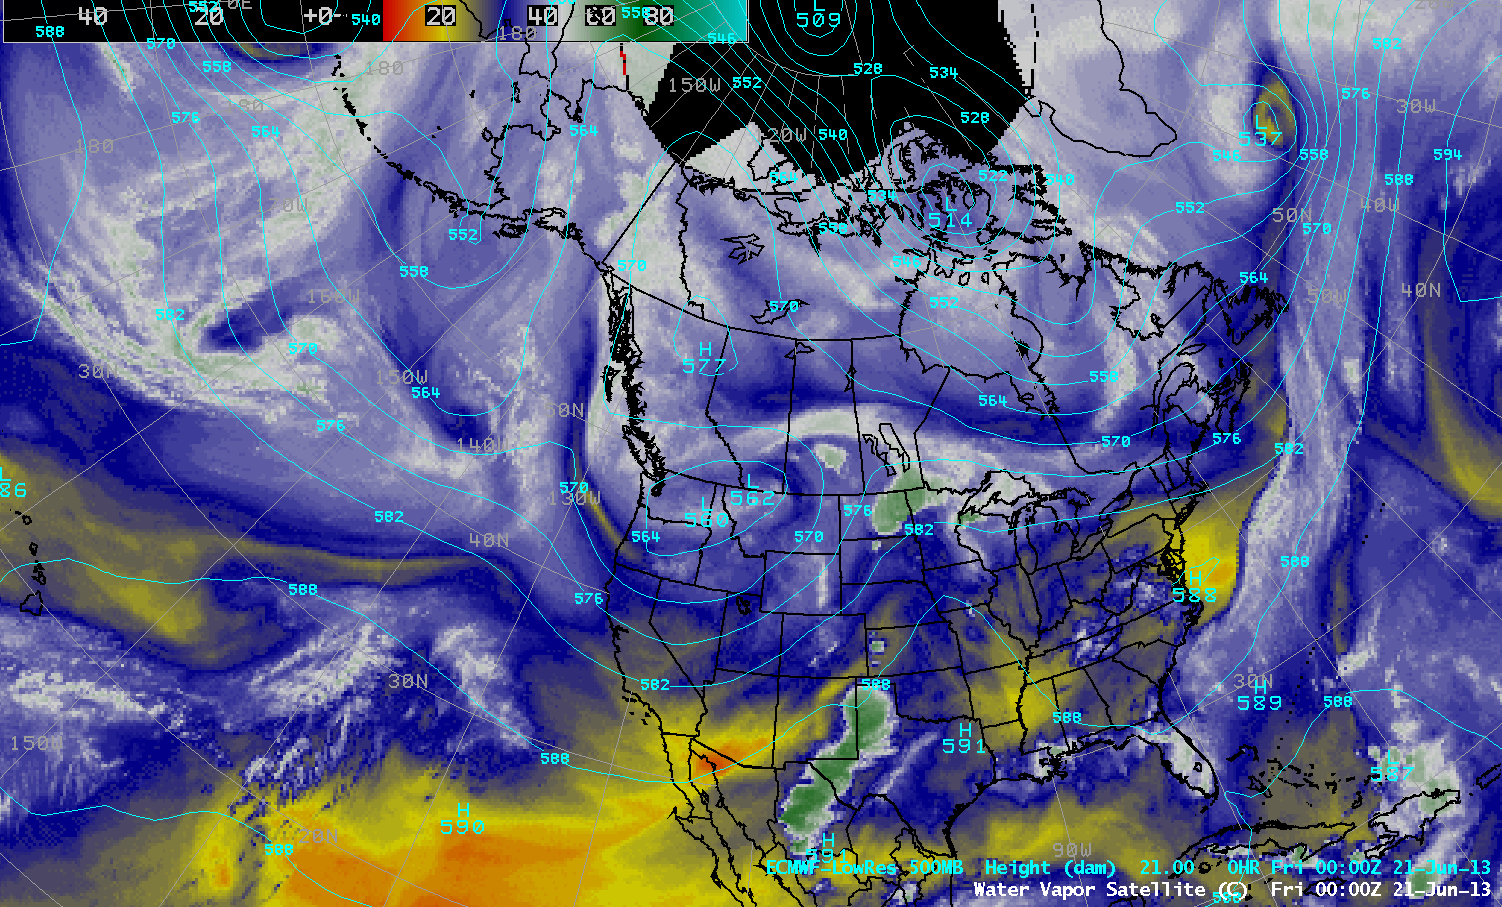 Water vapor image composites + ECMWF model 500 hPa geopotential heights